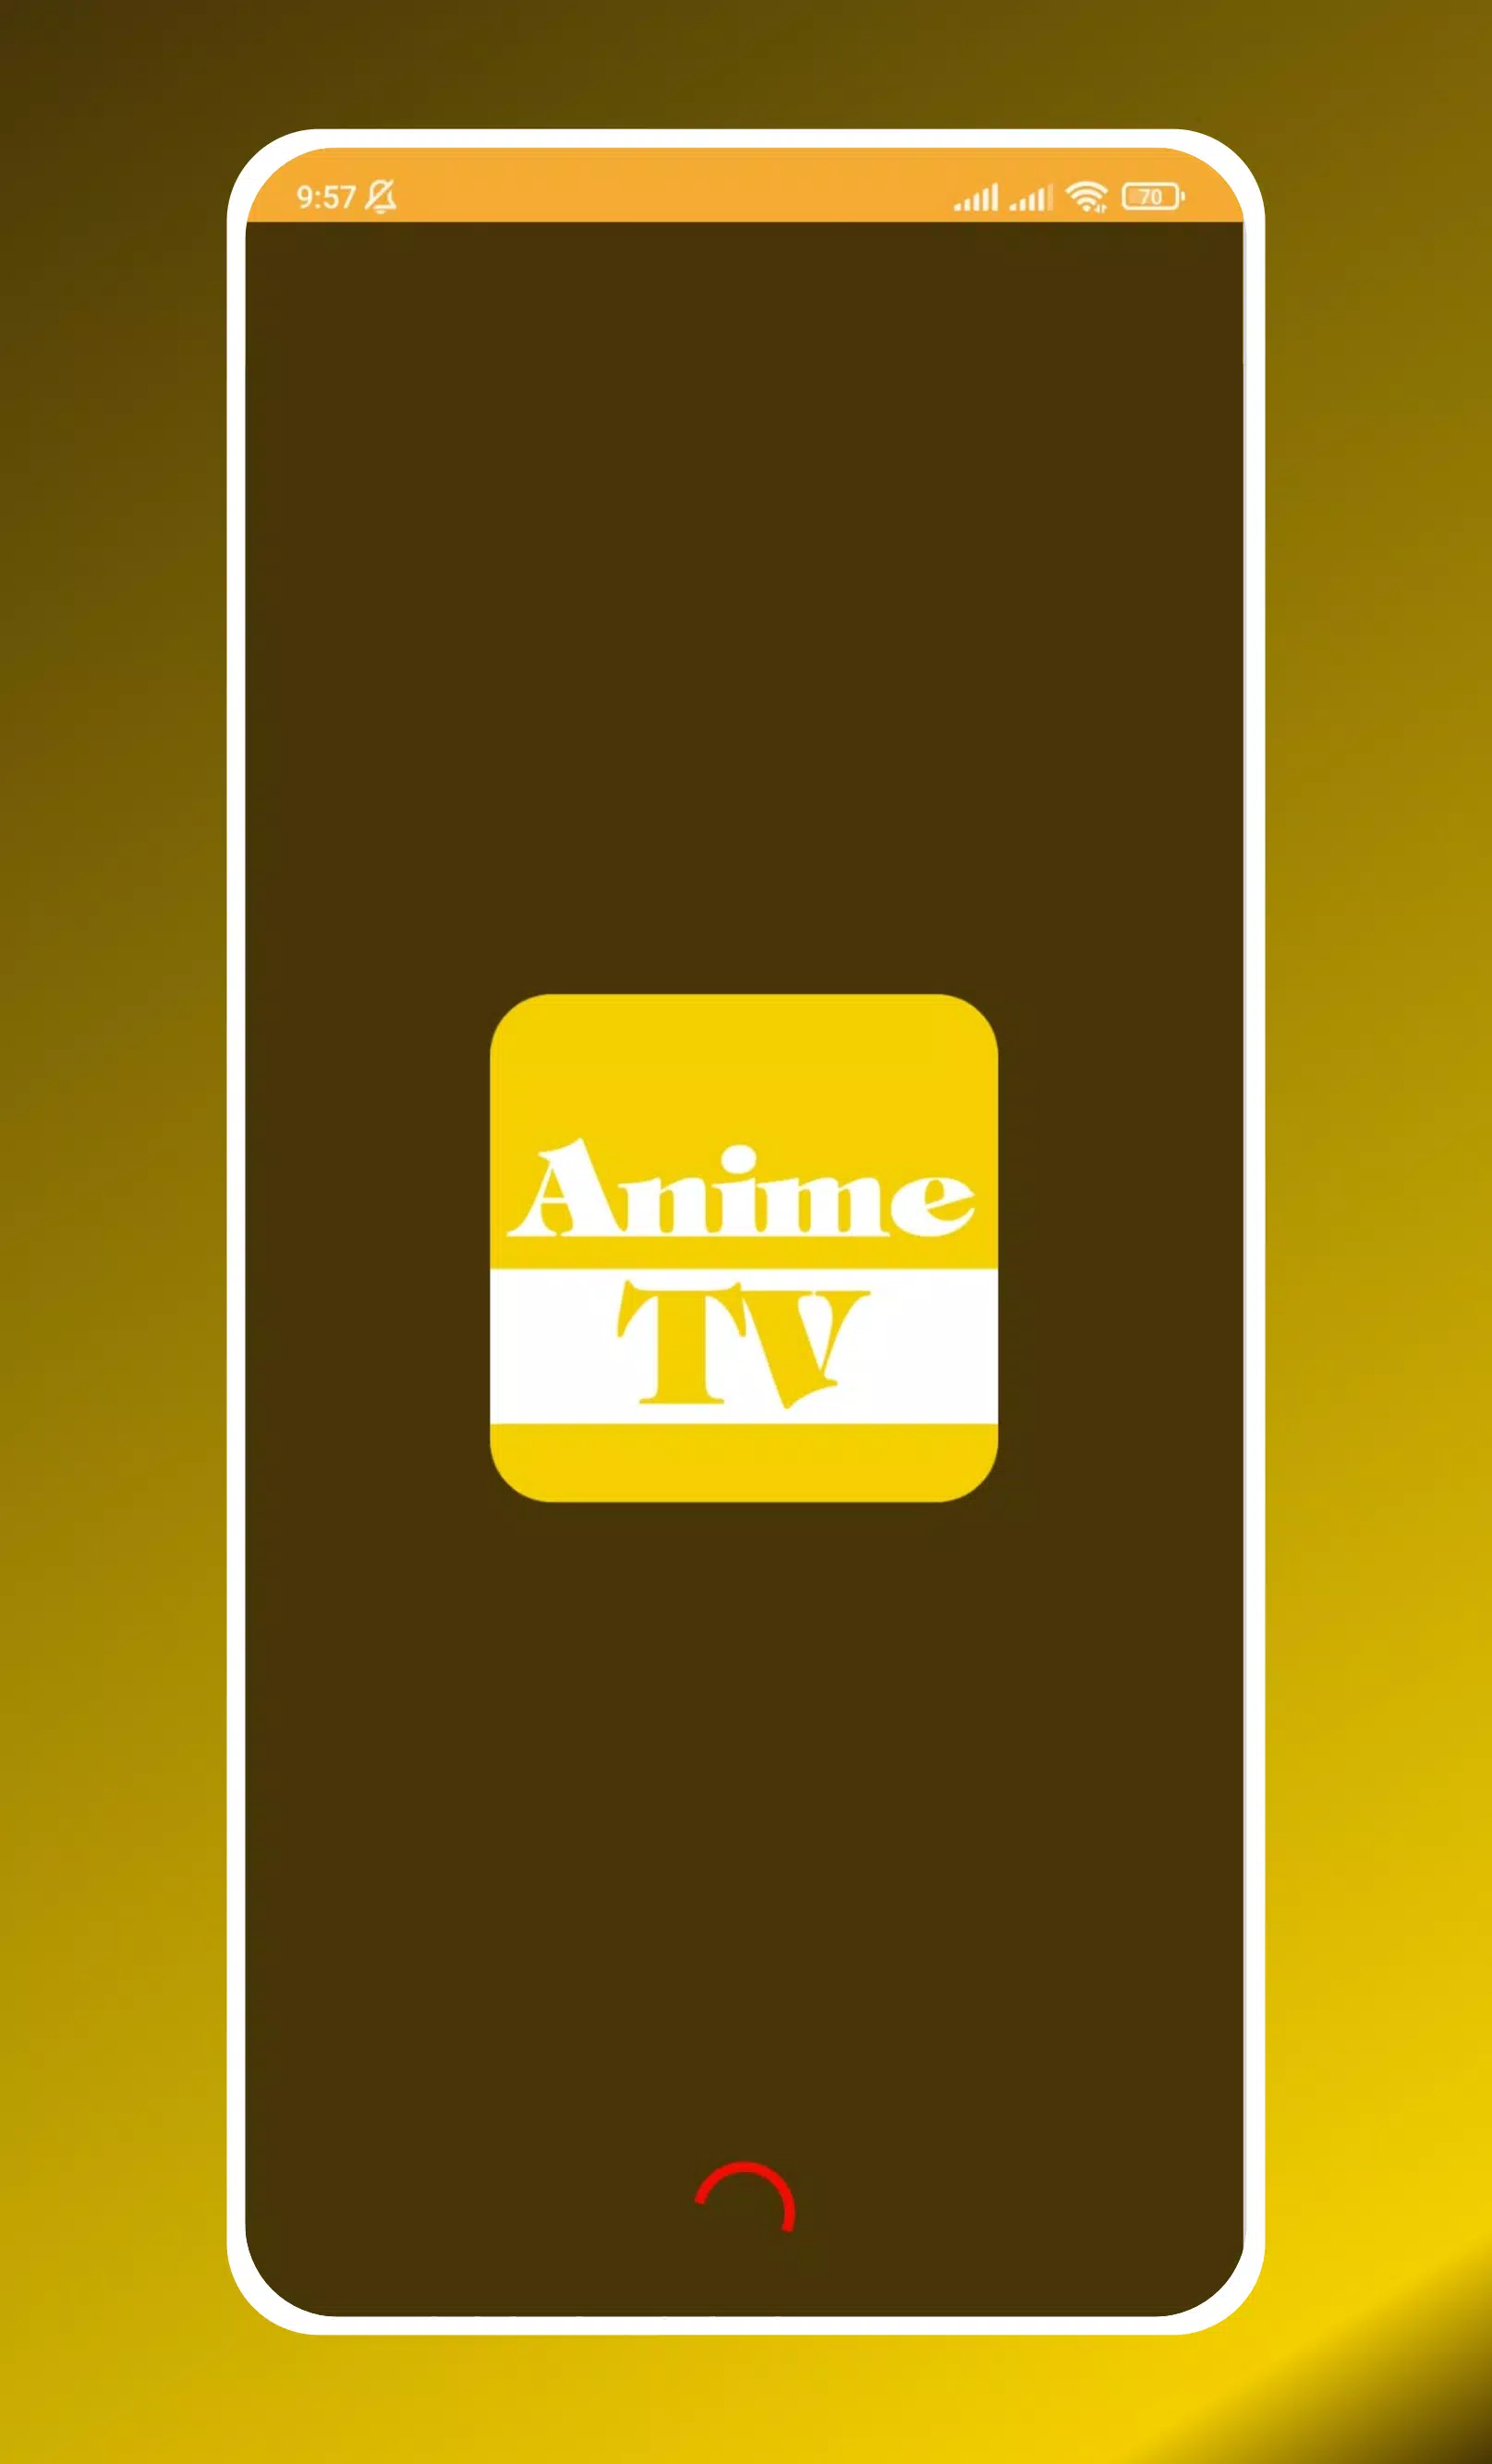 Anime tv - Anime Tv Online HD Apk Download for Android- Latest